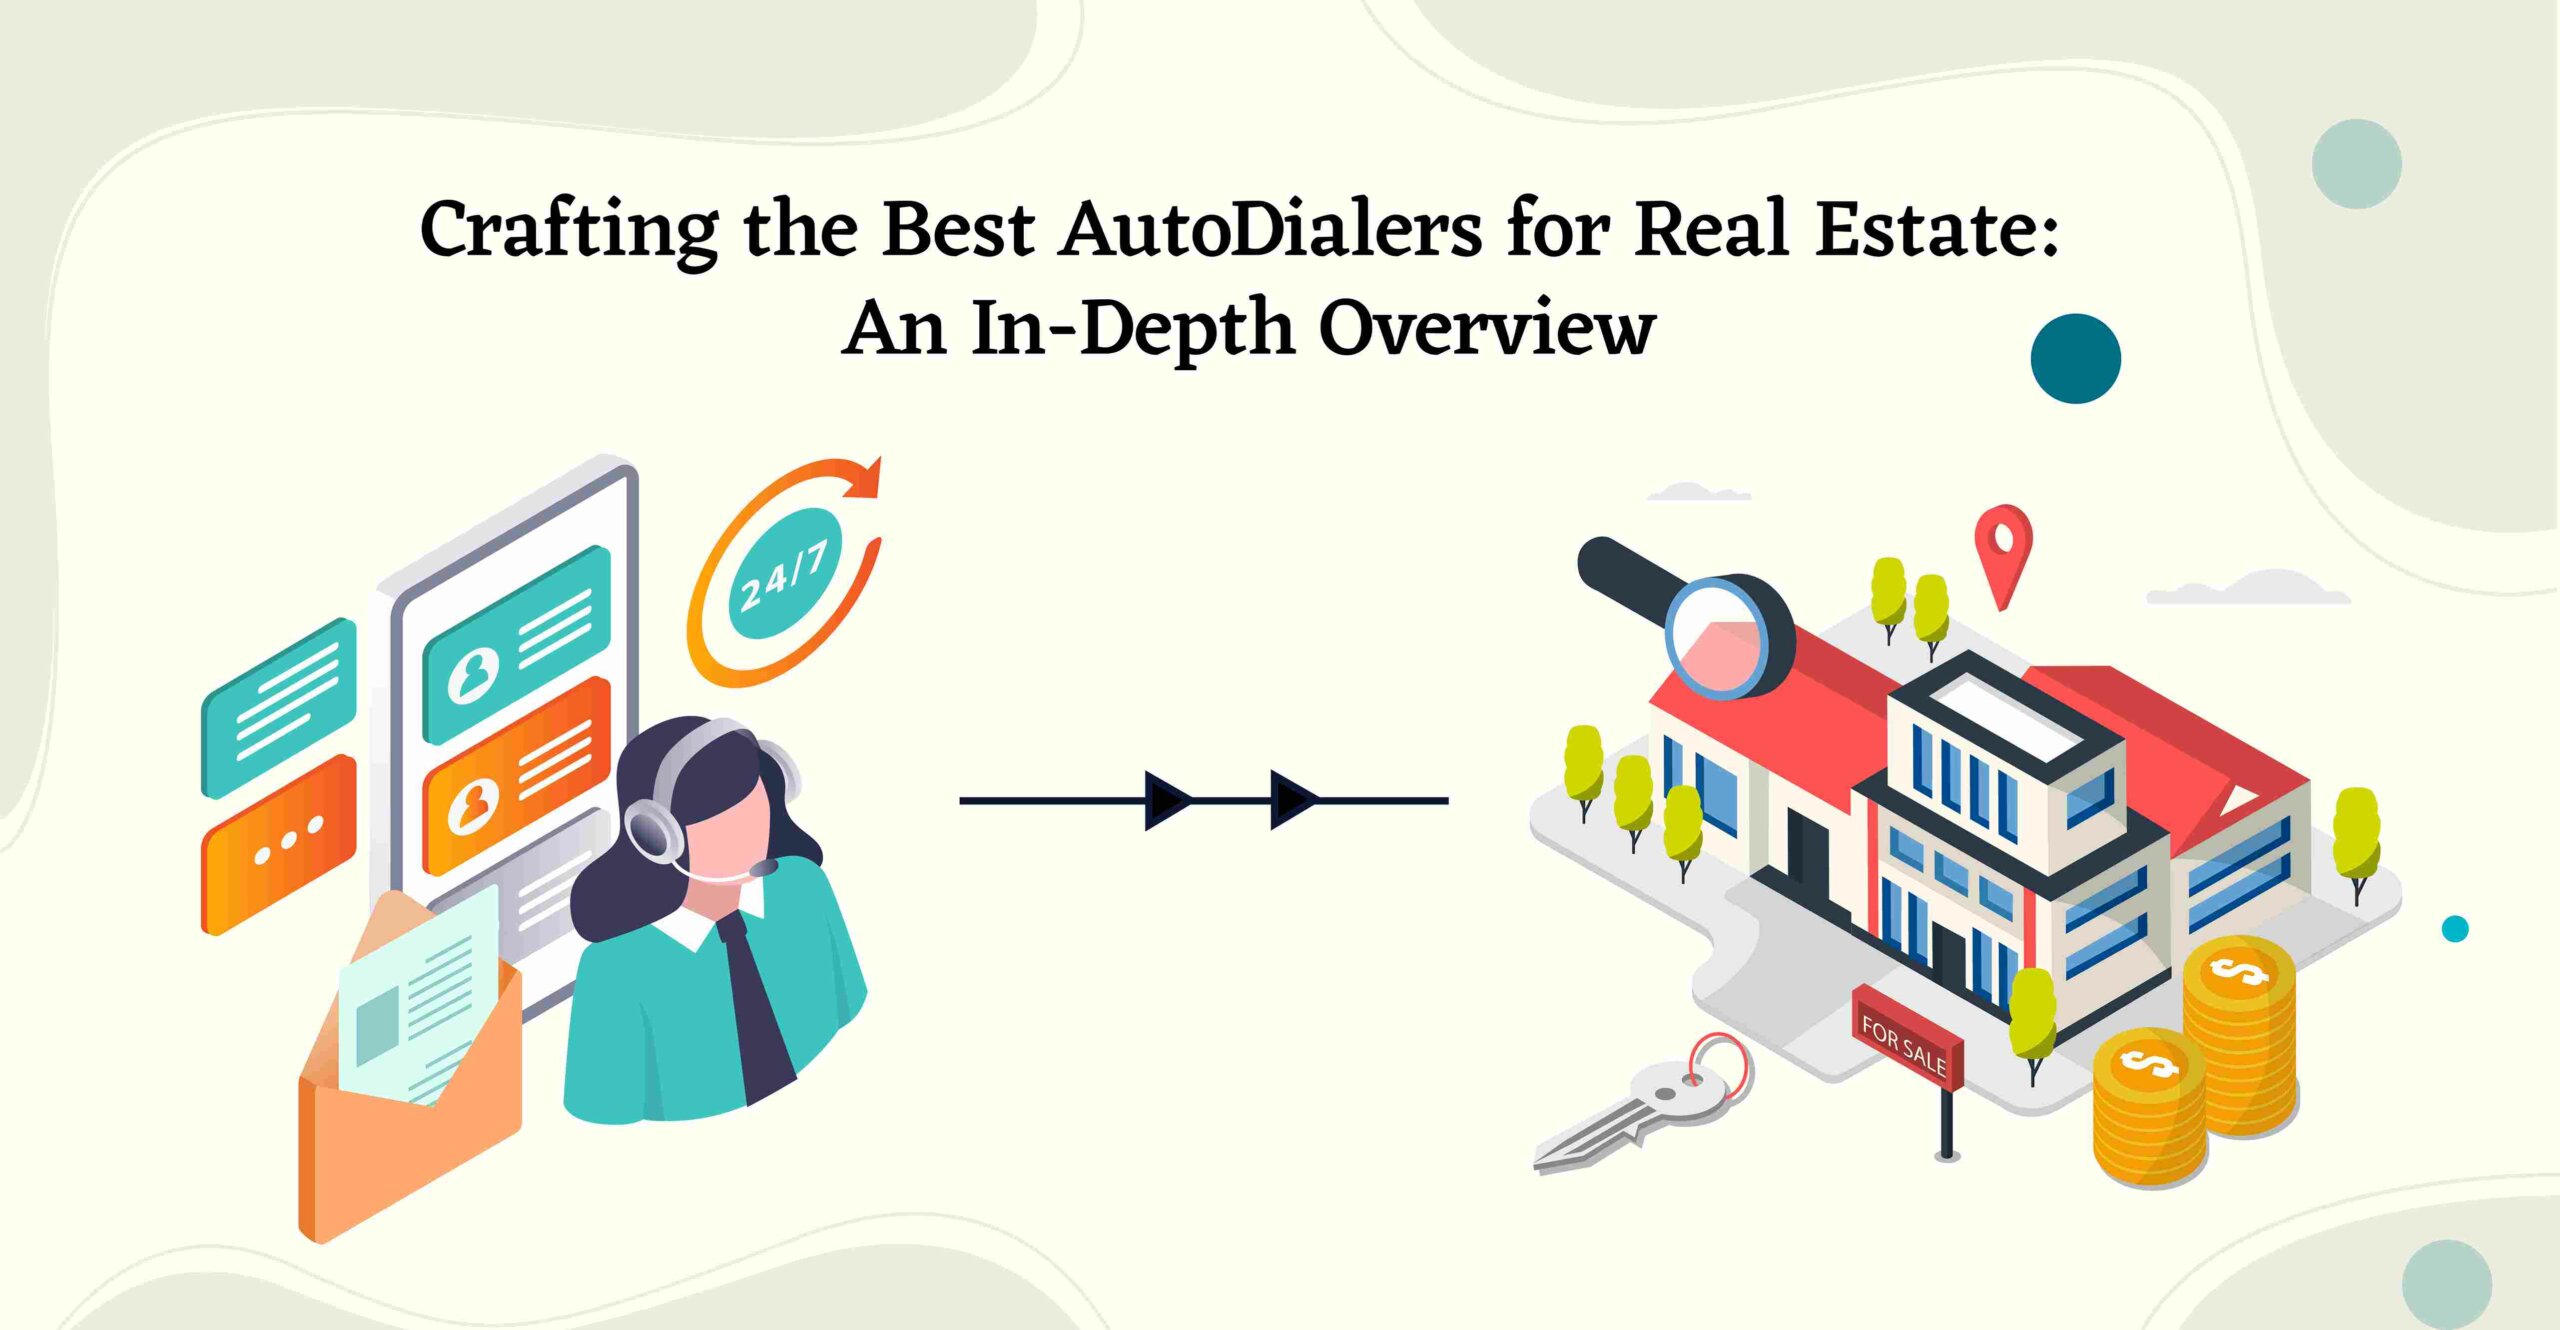 Crafting the Best AutoDialers for Real Estate: An In-Depth Overview